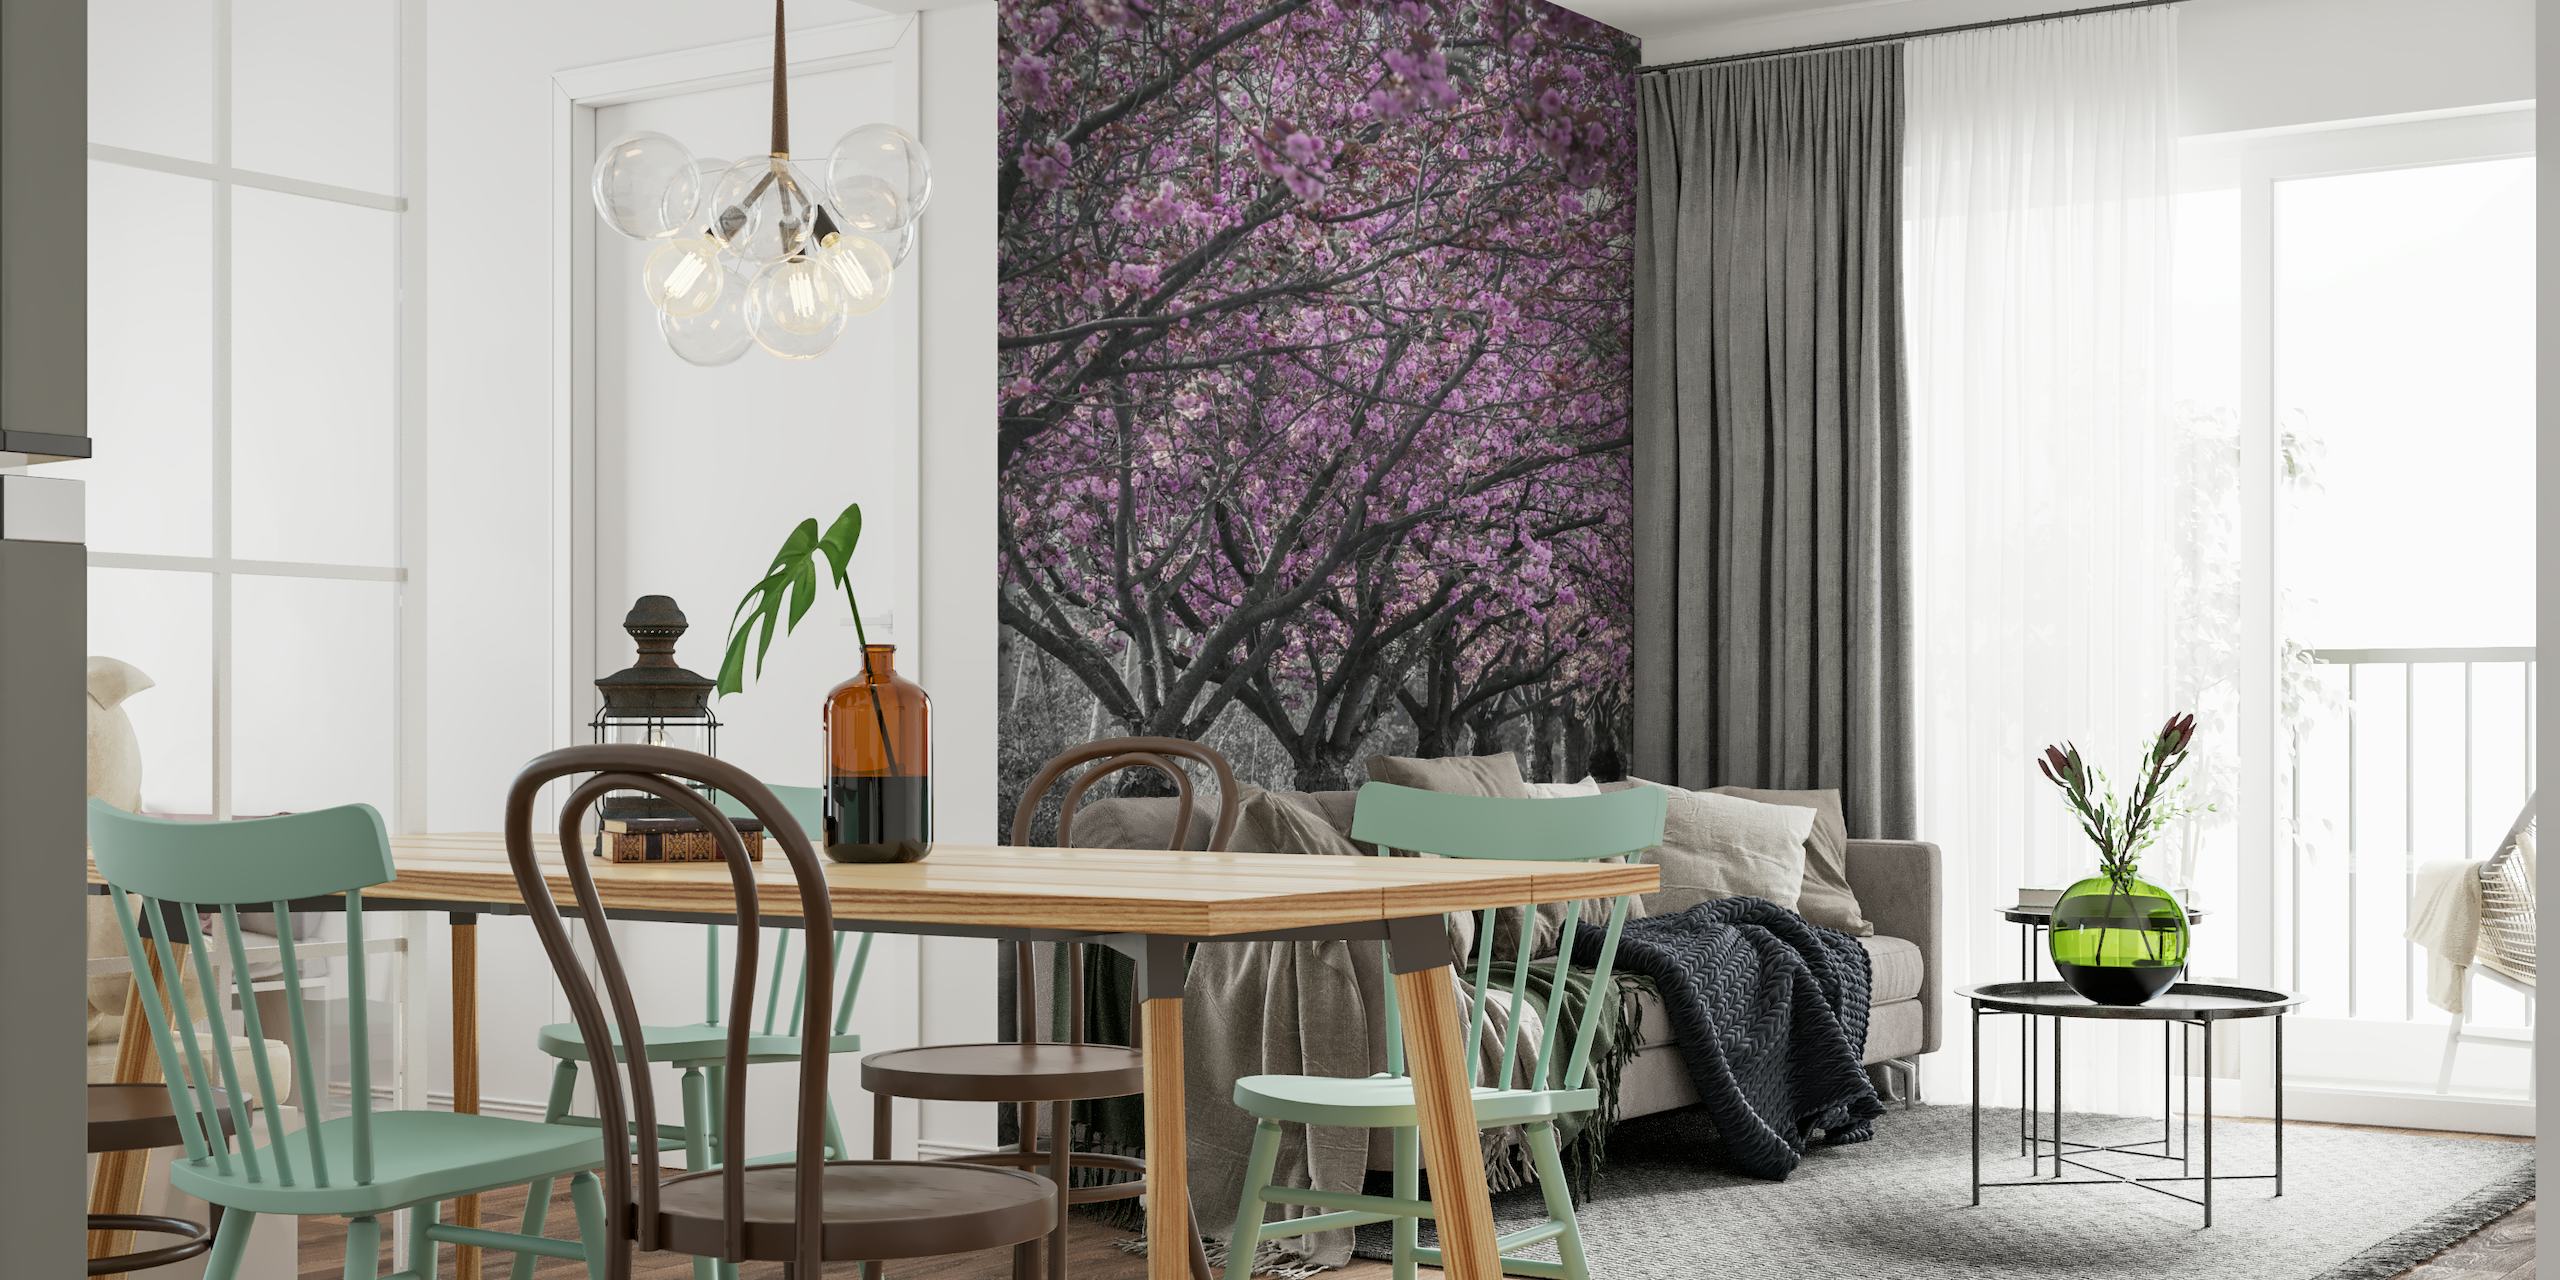 Pink cherry blossoms over a monochrome alley wall mural